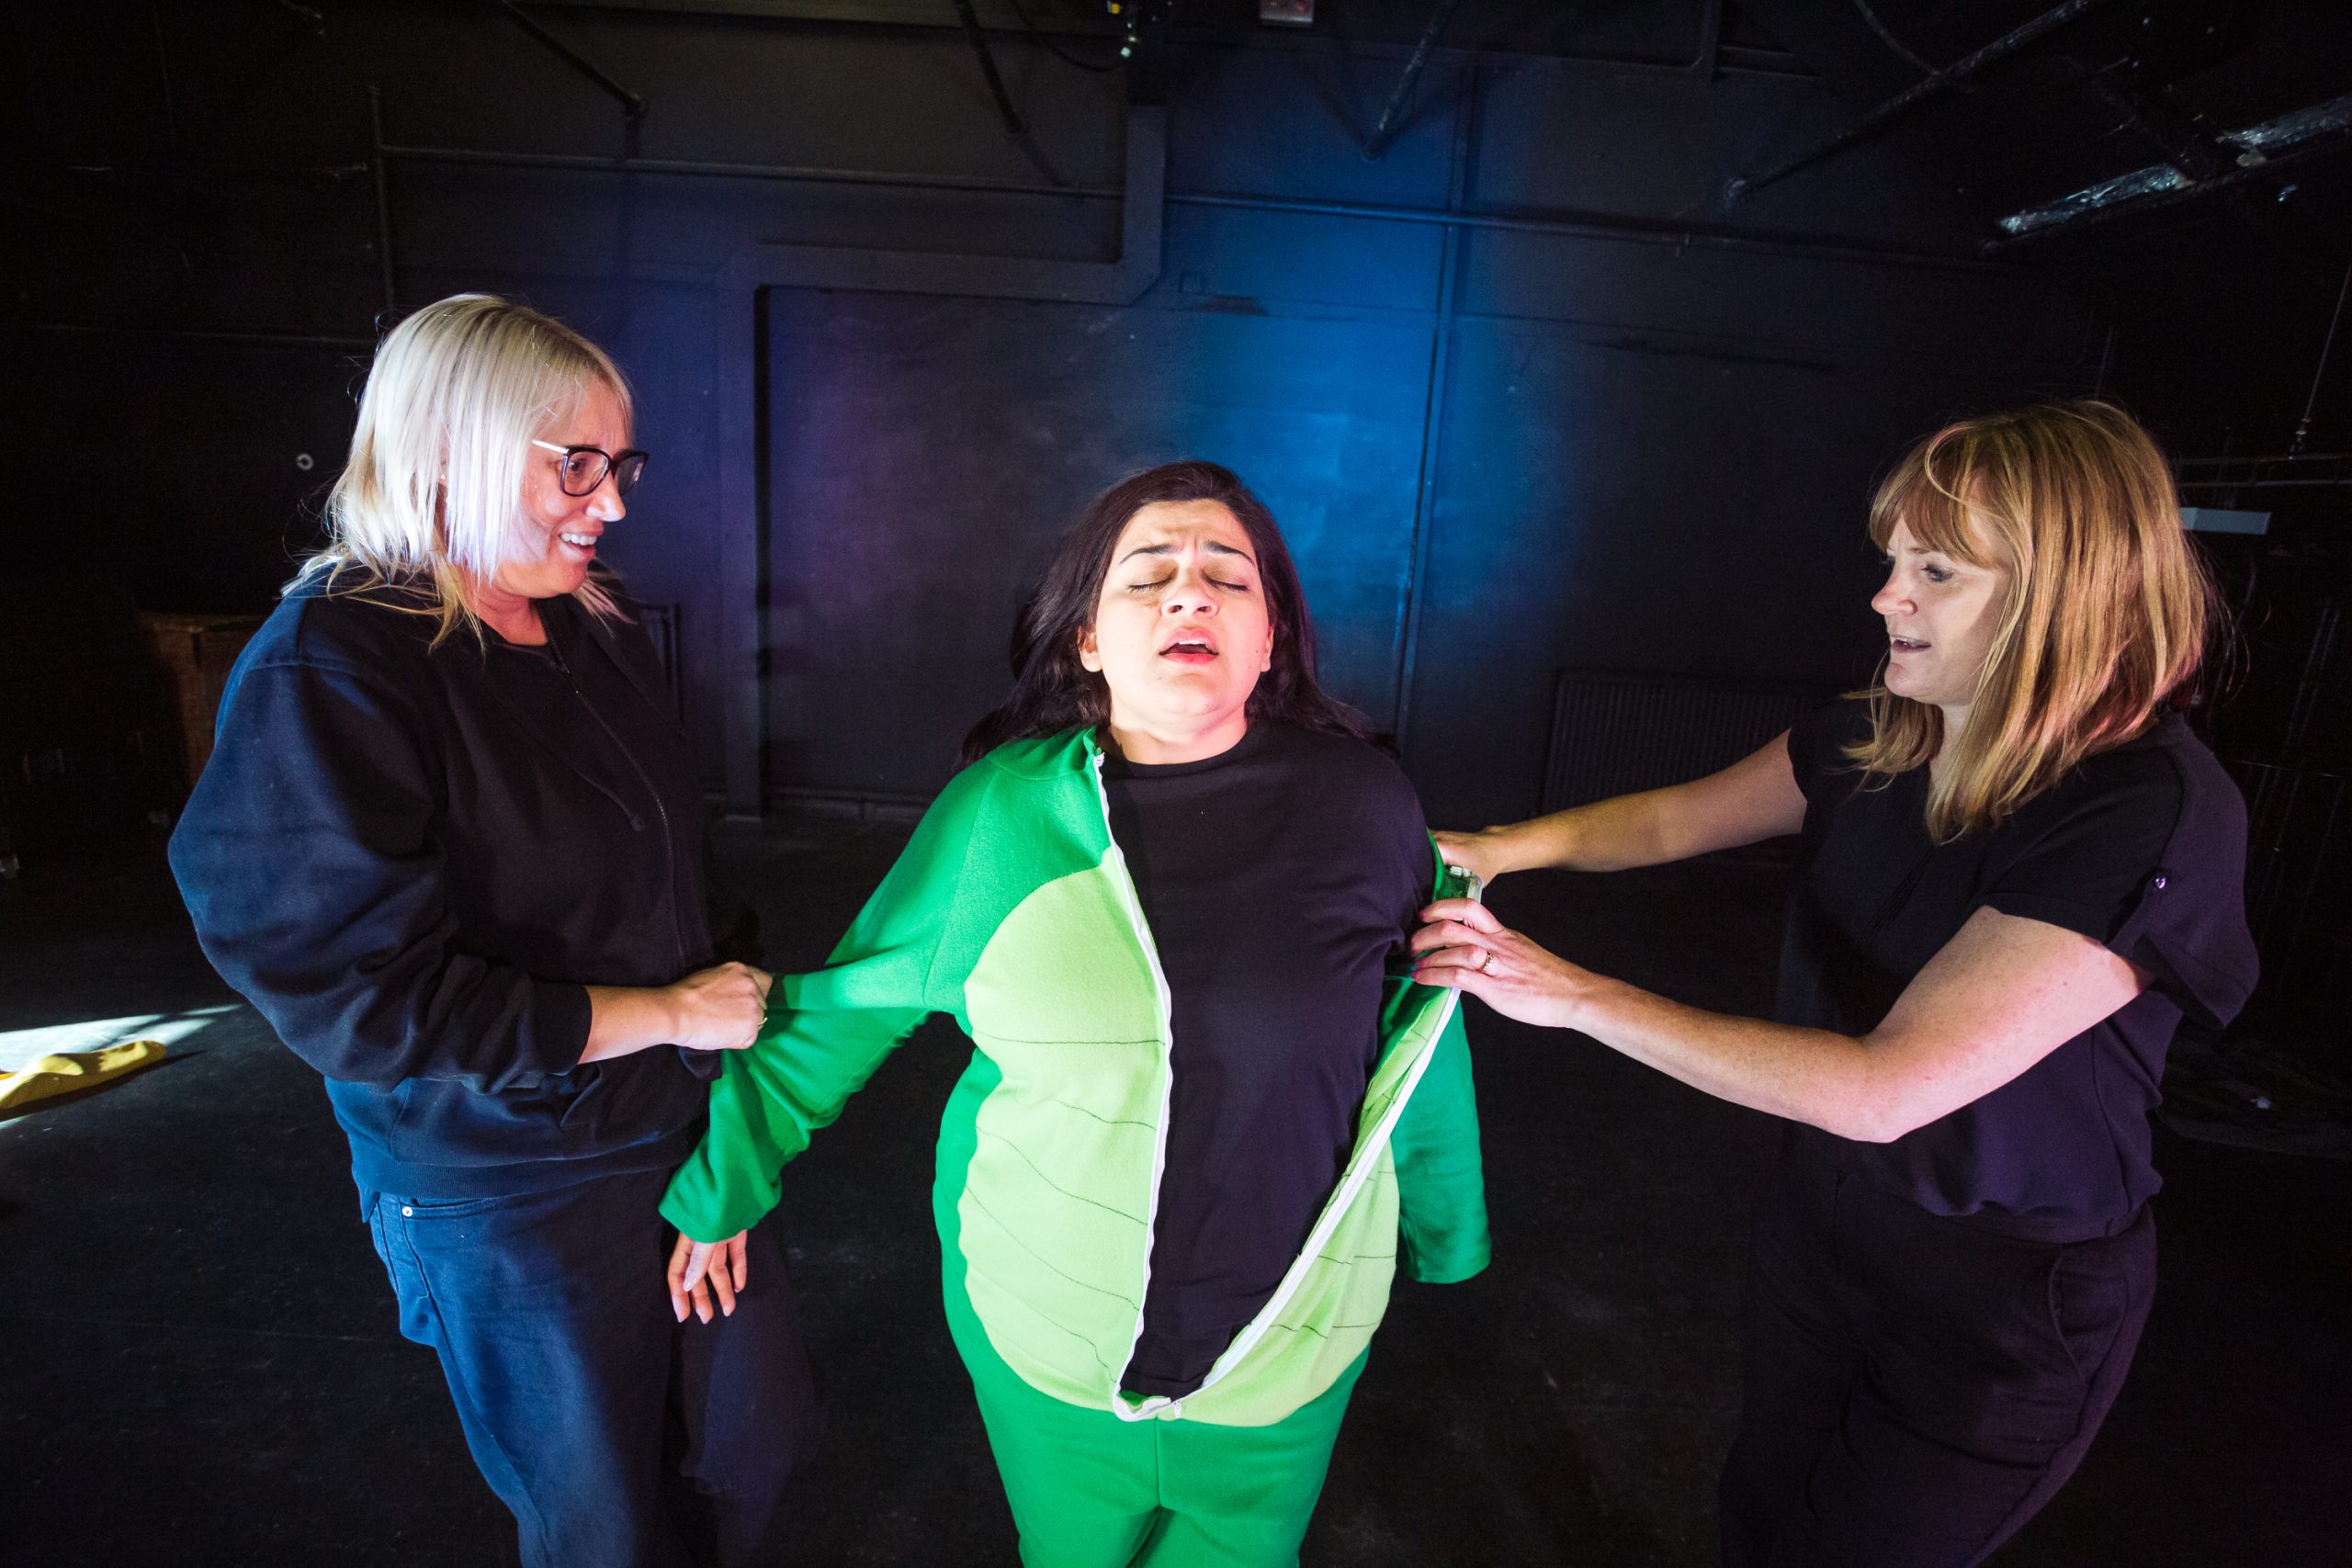 Meet Parveen Theatre Performance - Interactive Theatre Performance about Menopause by Falling Stars Theatre